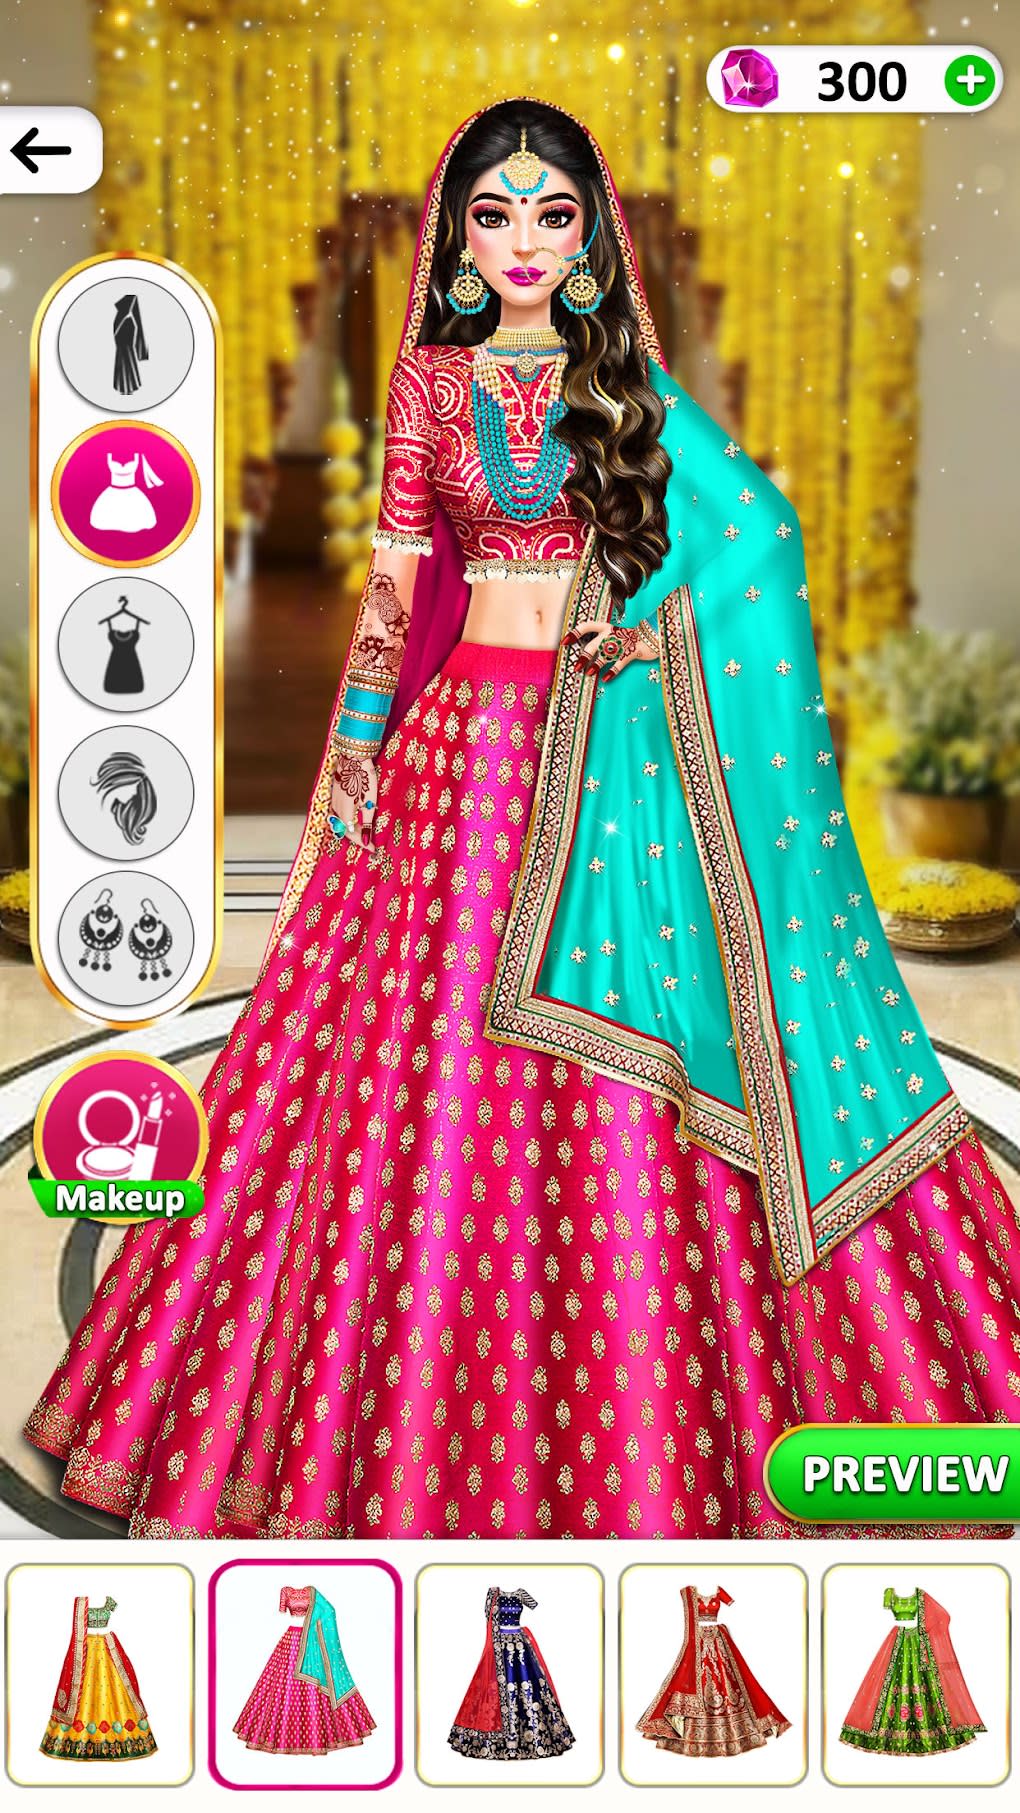 Royal Indian Western Makeup & Dressup Wedding Games-Dream Doll Decoration  and Stylist Salon Game-Makeup Artist-Wedding Dressup Game Makeover-Royal  Wedding Day-Wedding Games for Girls-FREE:Amazon.com:Appstore for Android